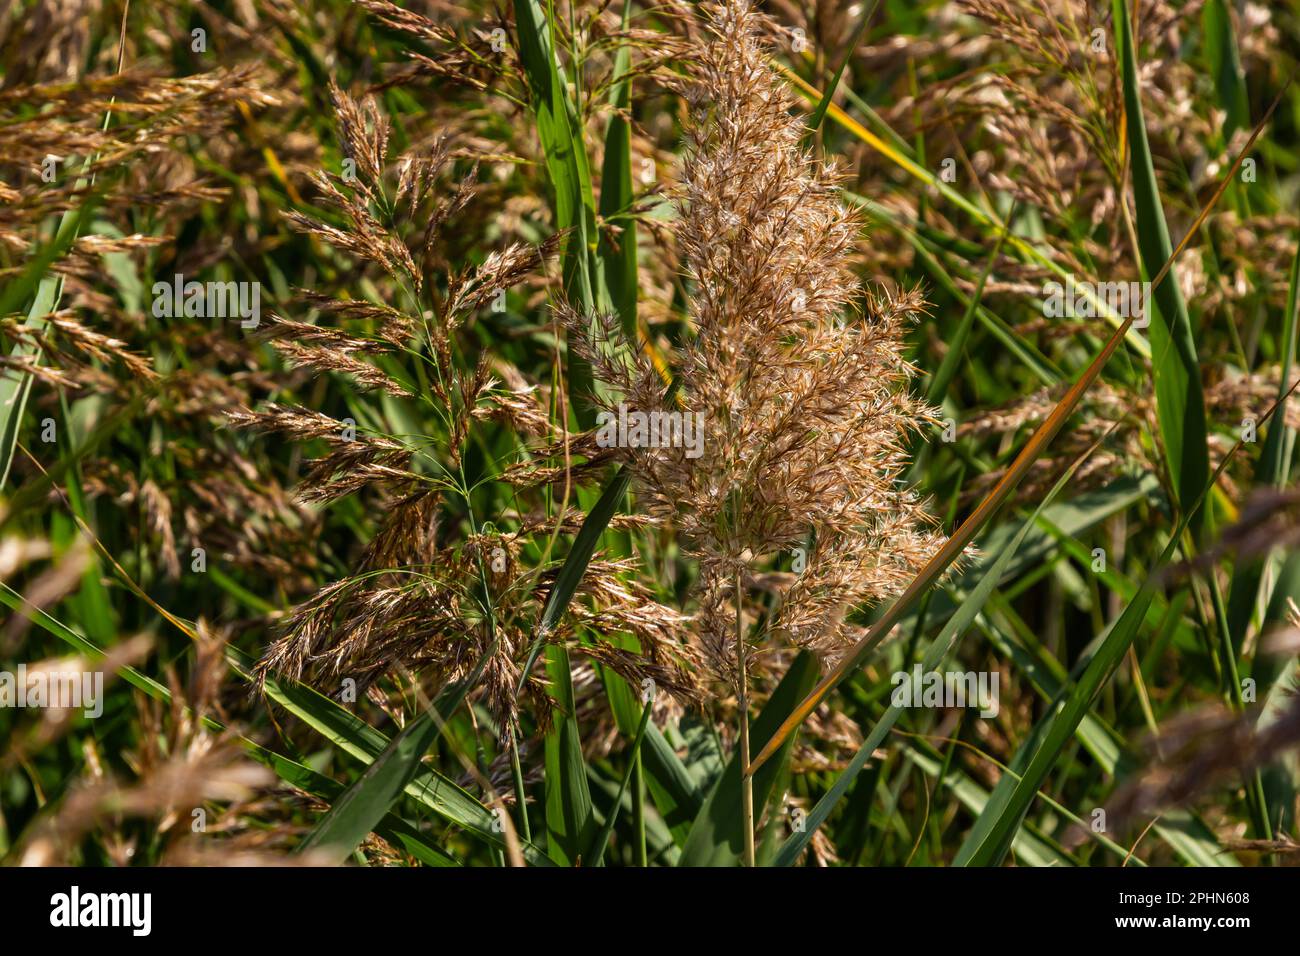 Phragmites australis is a herbaceous perennial bluish-green plant of the grass family, with a long creeping rhizome. Stock Photo